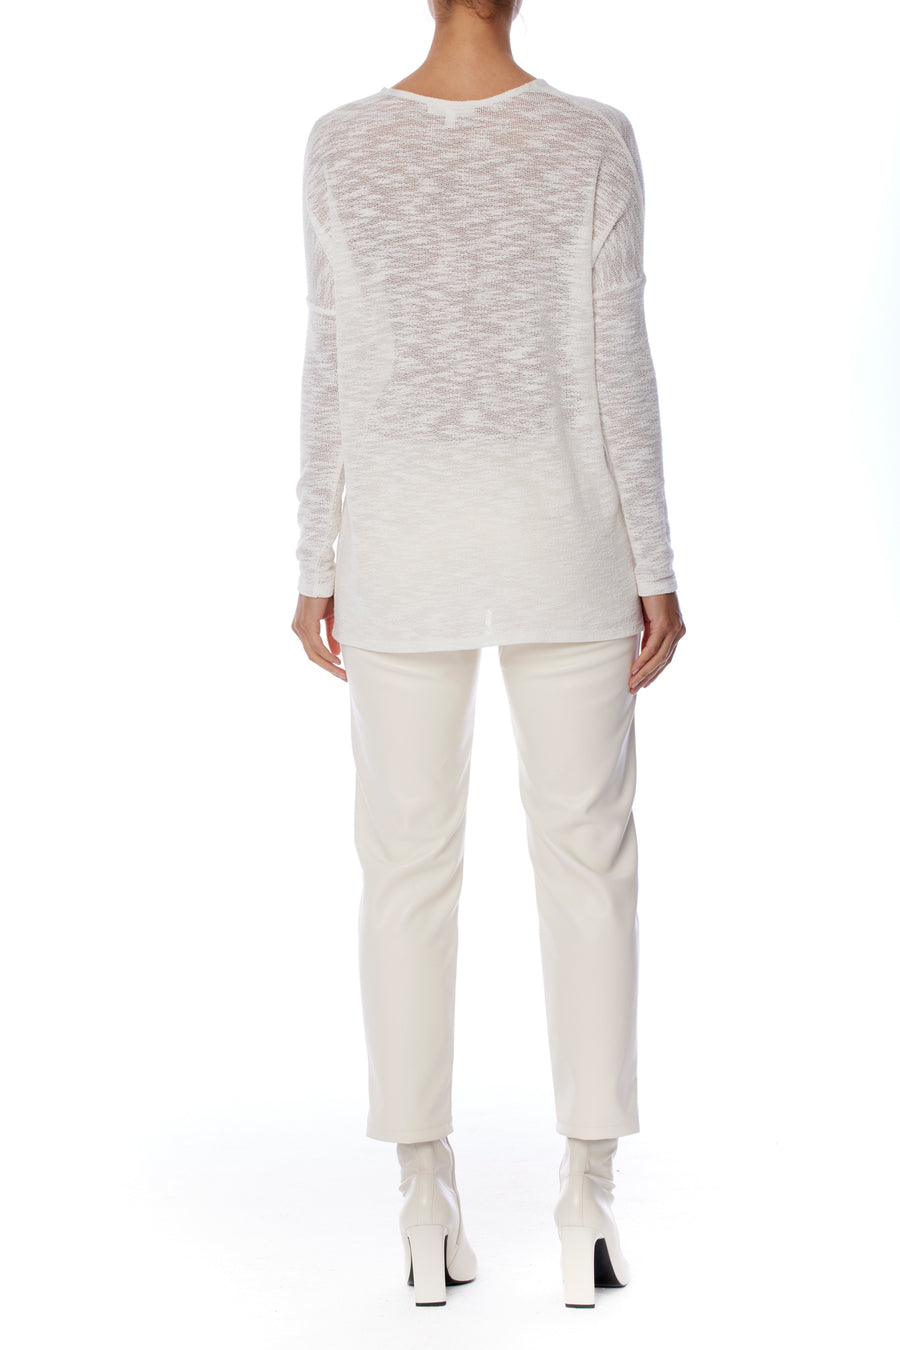 Relaxed fit, lightweight sweater with V-neck, long sleeves and a drop shoulder hem in white